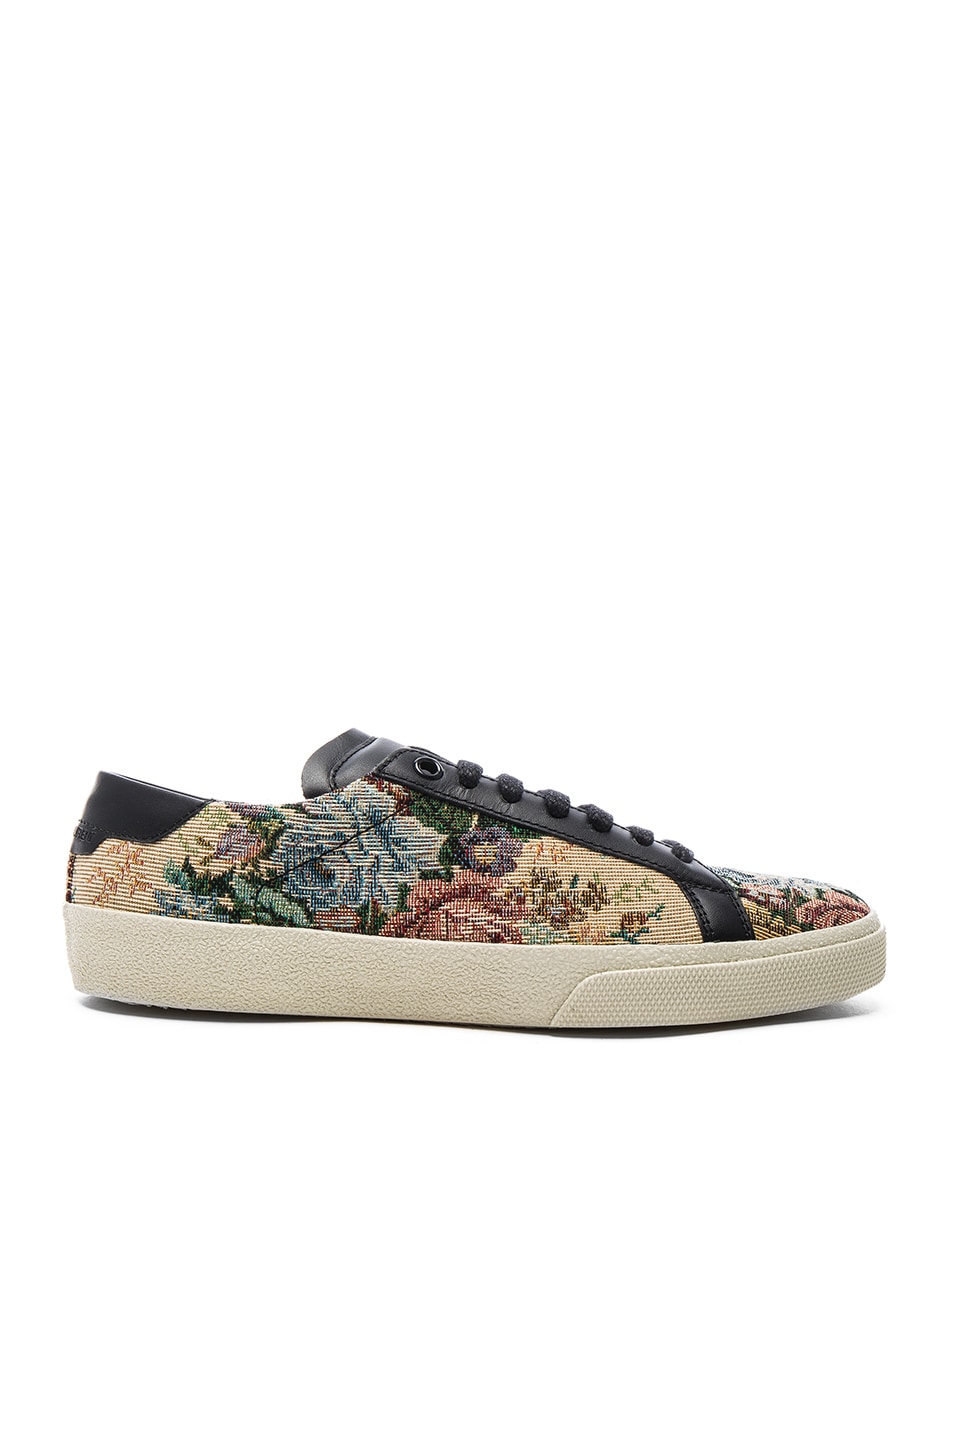 Image 1 of Saint Laurent Court Classic Floral Tapestry Sneakers in Black & Multi